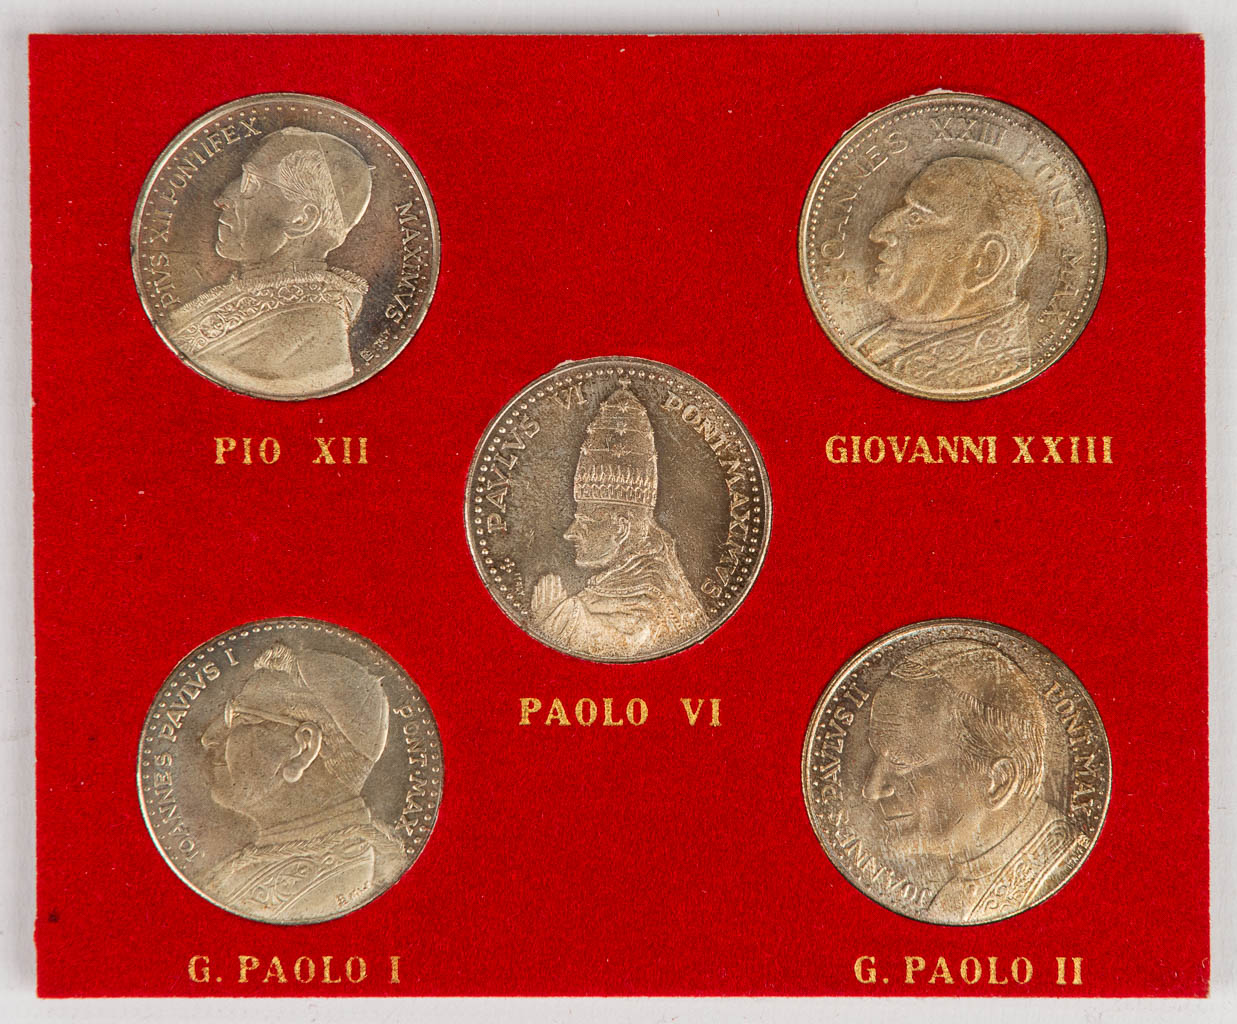 A collection of 5 badges with Papal figurines: Pio XII, Giovanni XXIII, G. Paolo II, G. Paolo I, Paolo VI. (H:11cm)